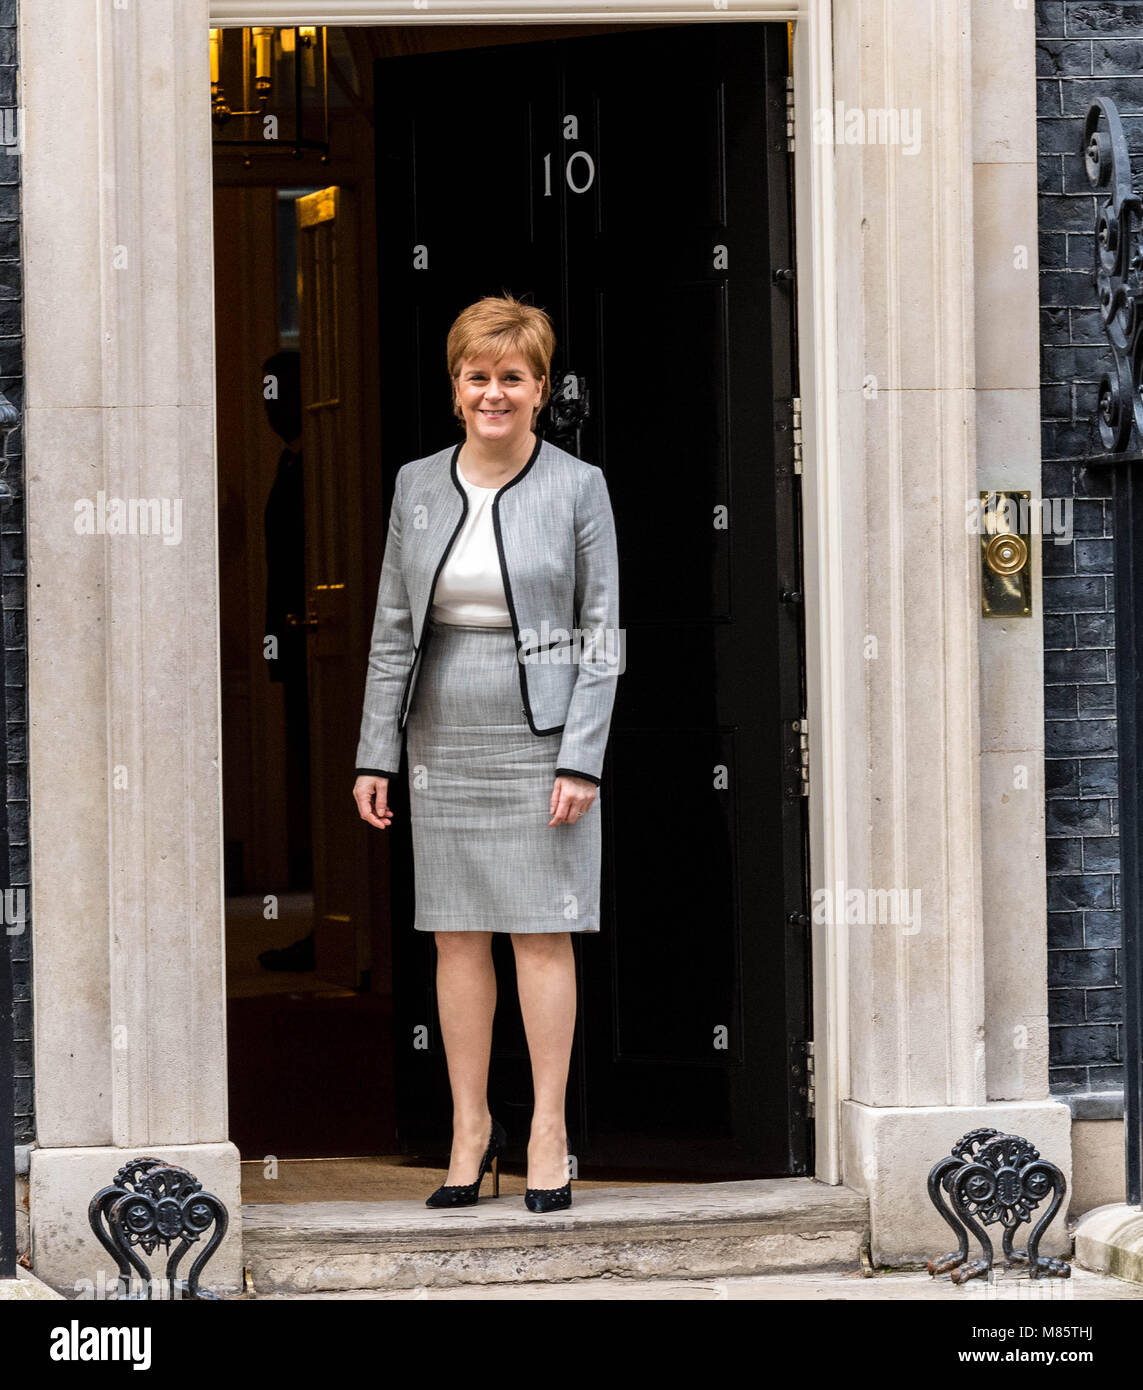 London 14th March 2018, Nicola Sturgeon Scottish First Minster, arrives in Downing Street for a crunch Breit meeting with the Prime Minister Theresa May on Brexit implementation laws Credit: Ian Davidson/Alamy Live News Stock Photo